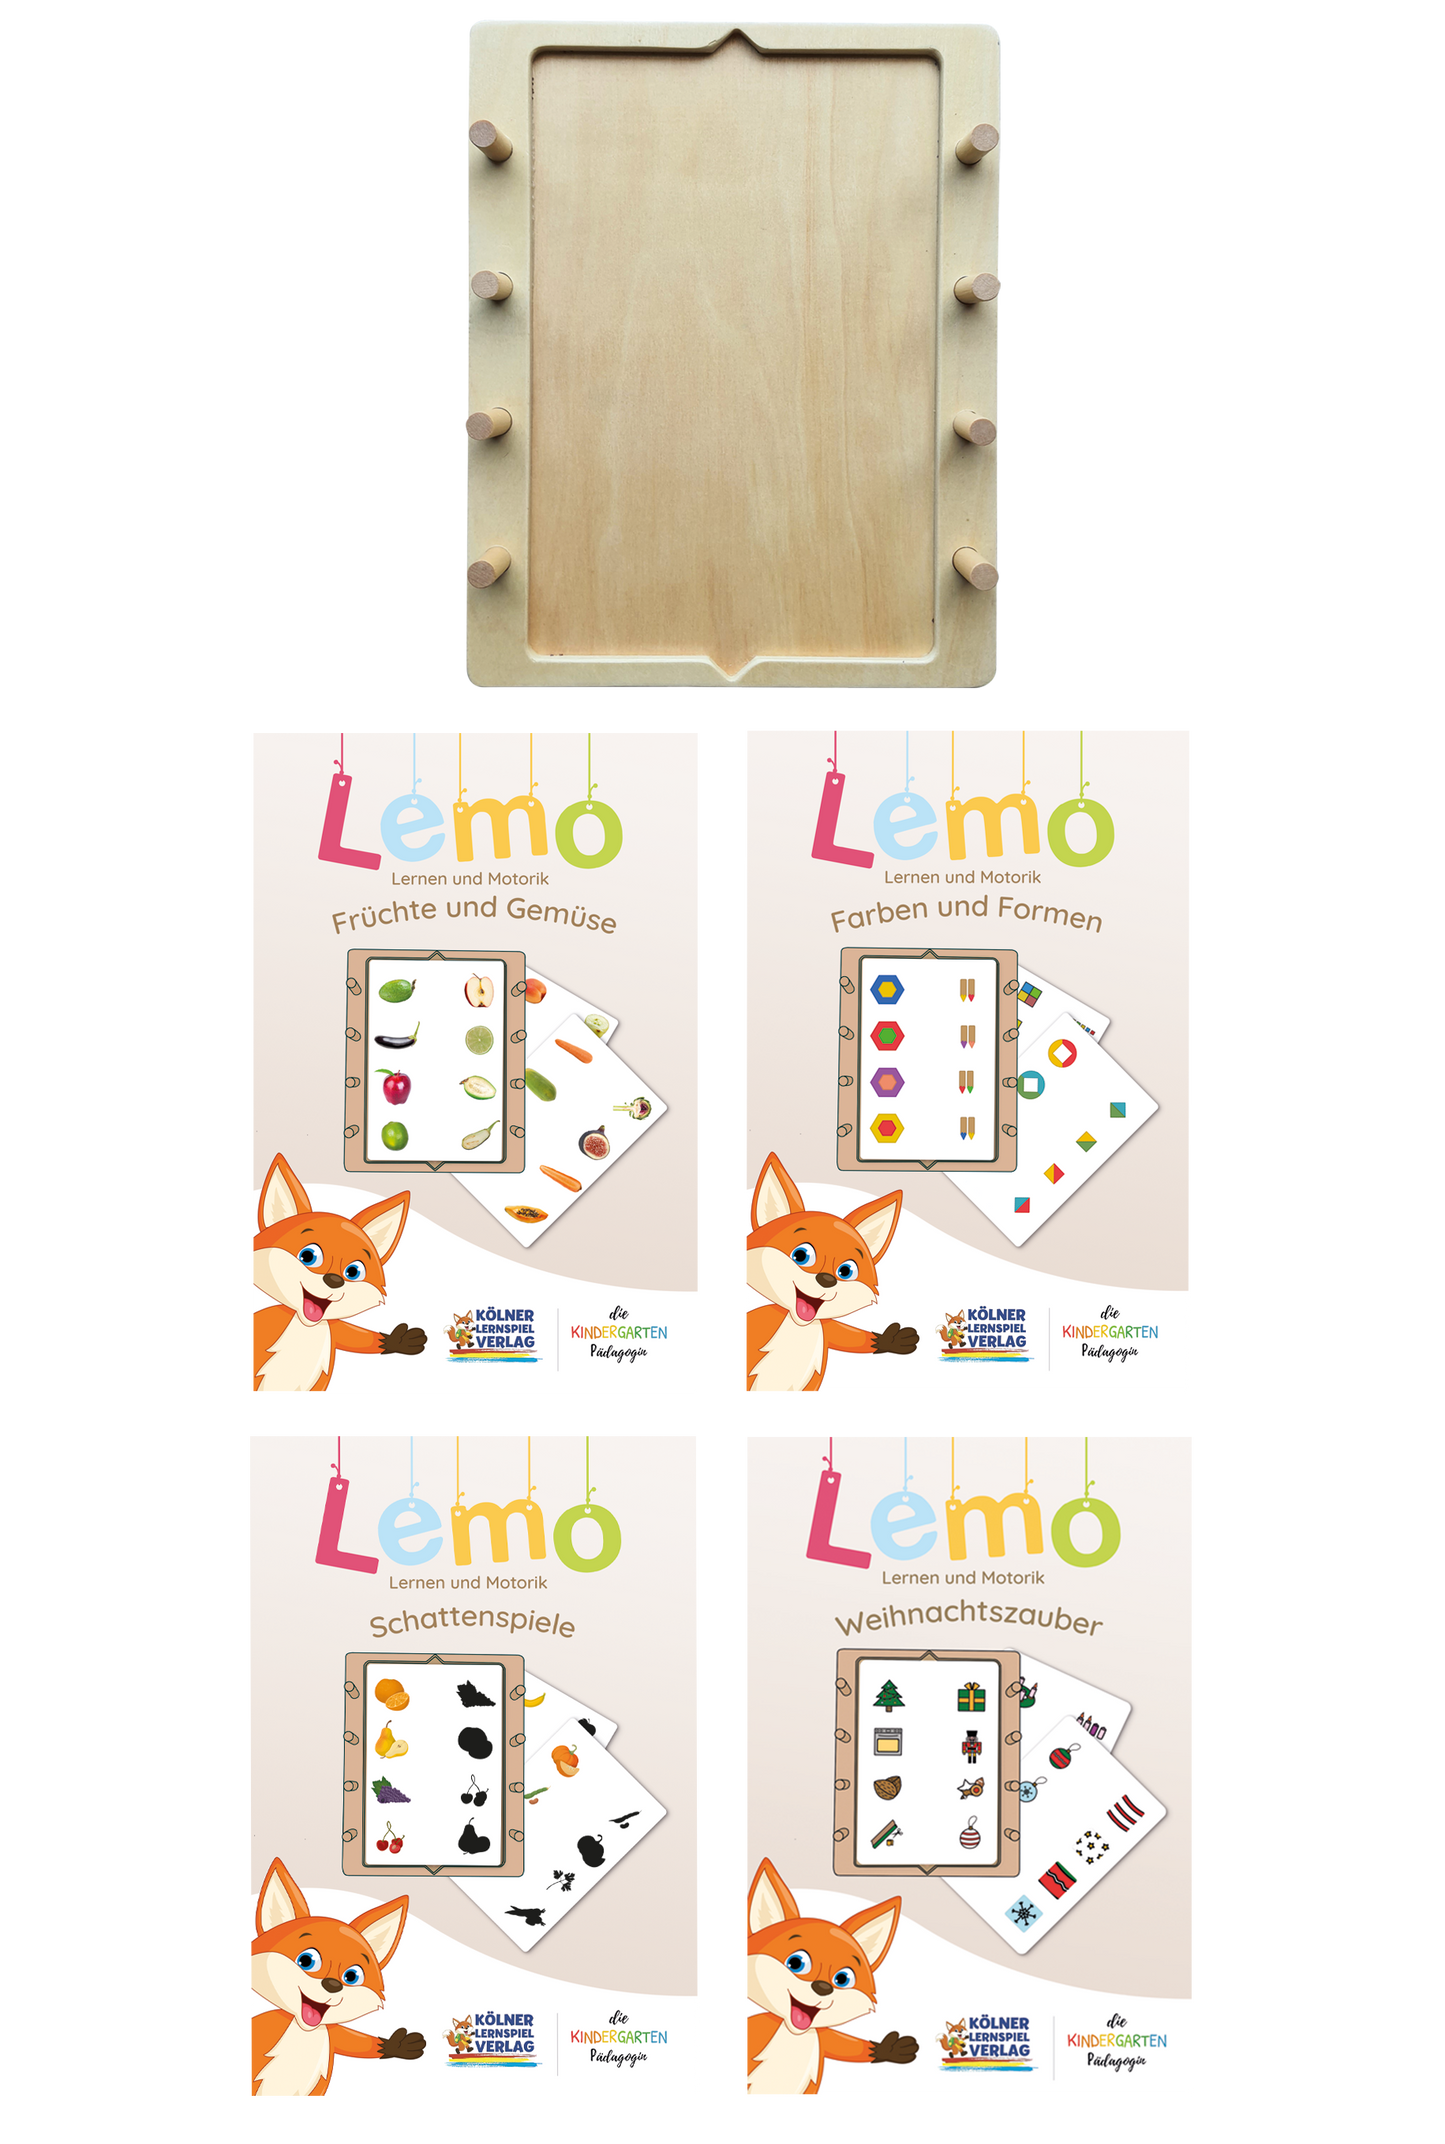 Lemo starter set from 3 years: wooden frame and 3 decks of cards